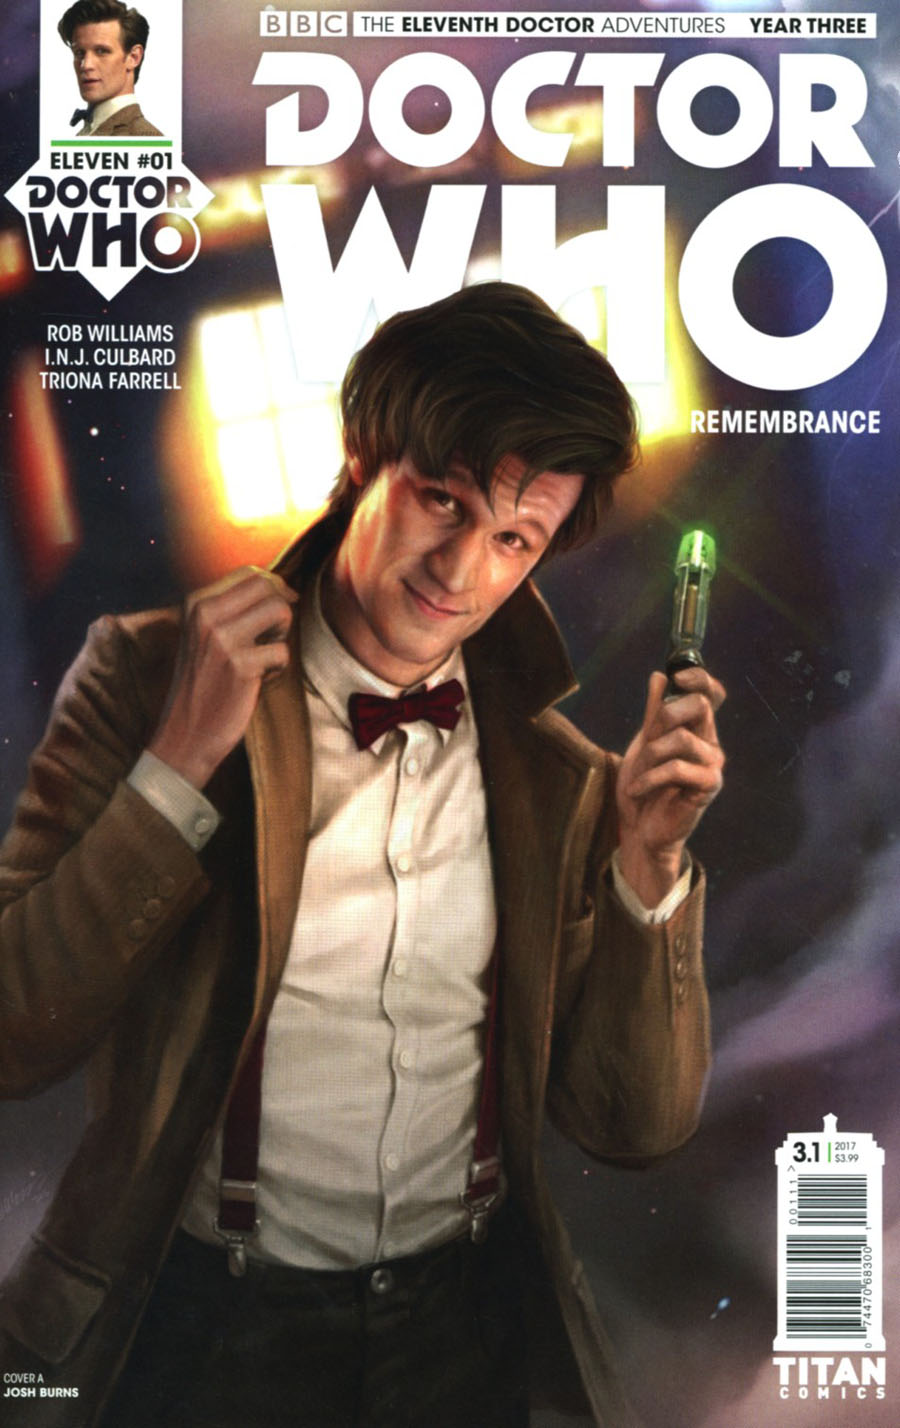 Doctor Who 11th Doctor Year Three #1 Cover A Regular Josh Burns Cover